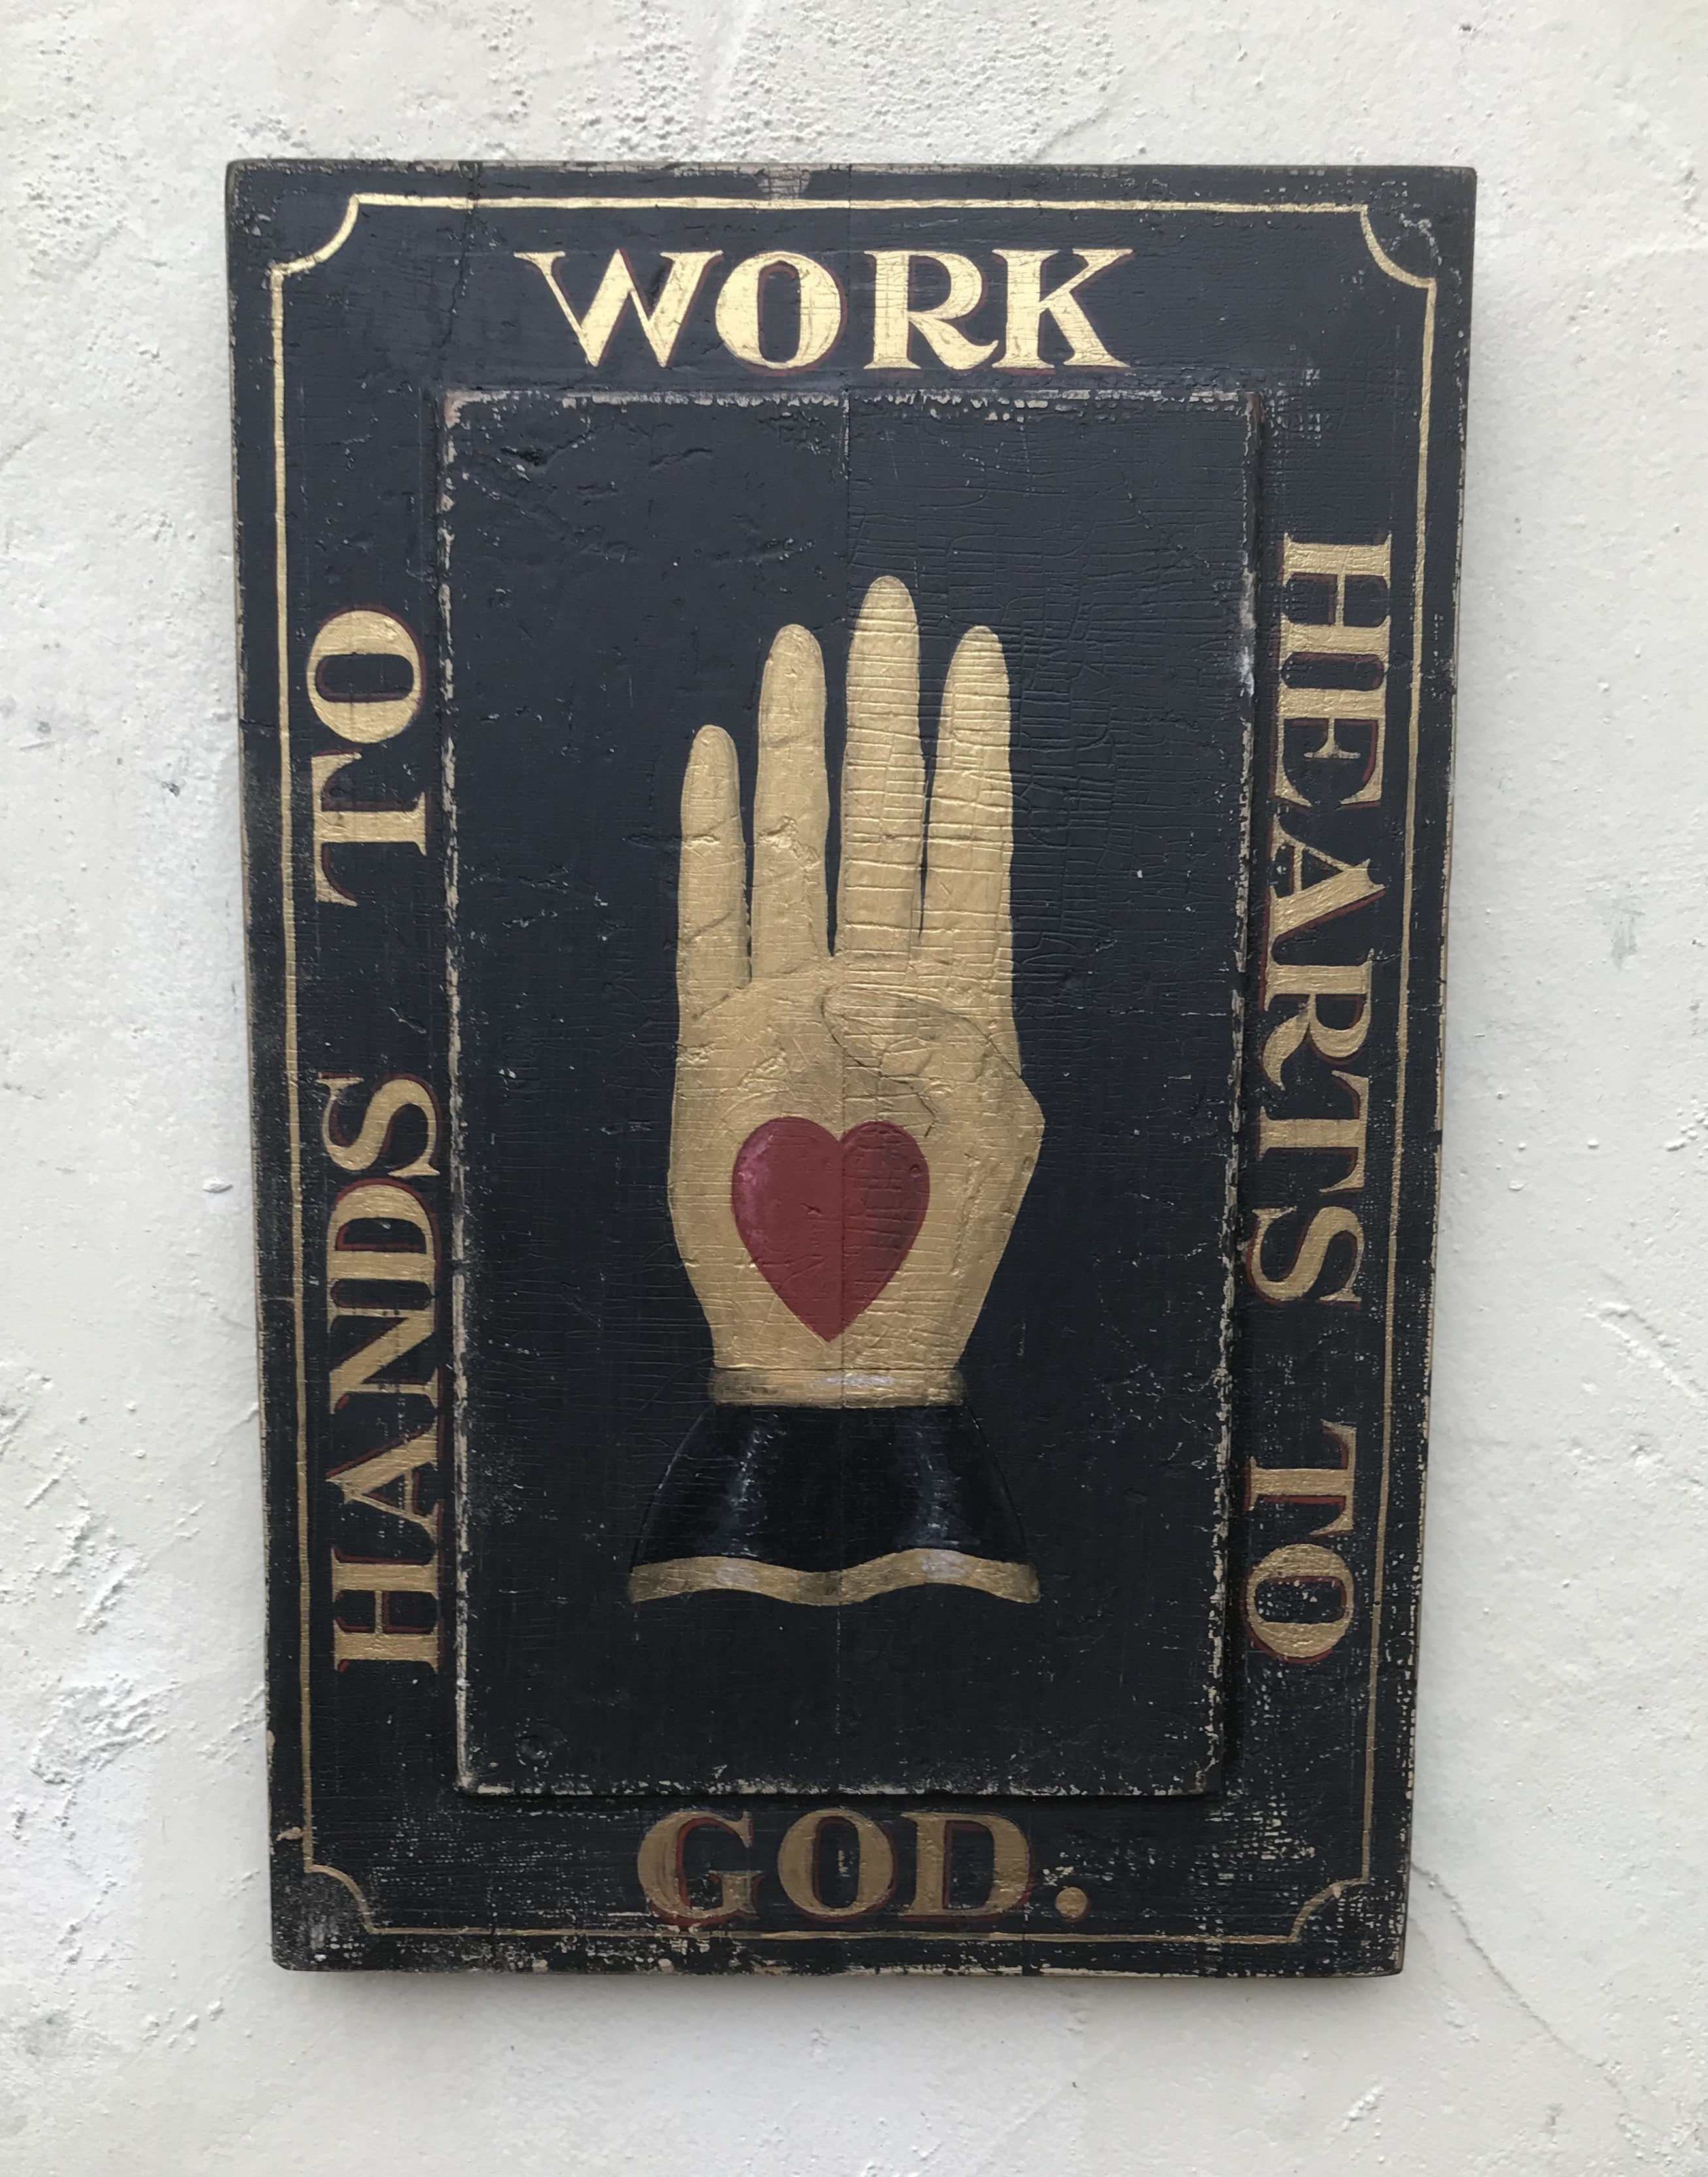 Hands To Work, Hearts To God